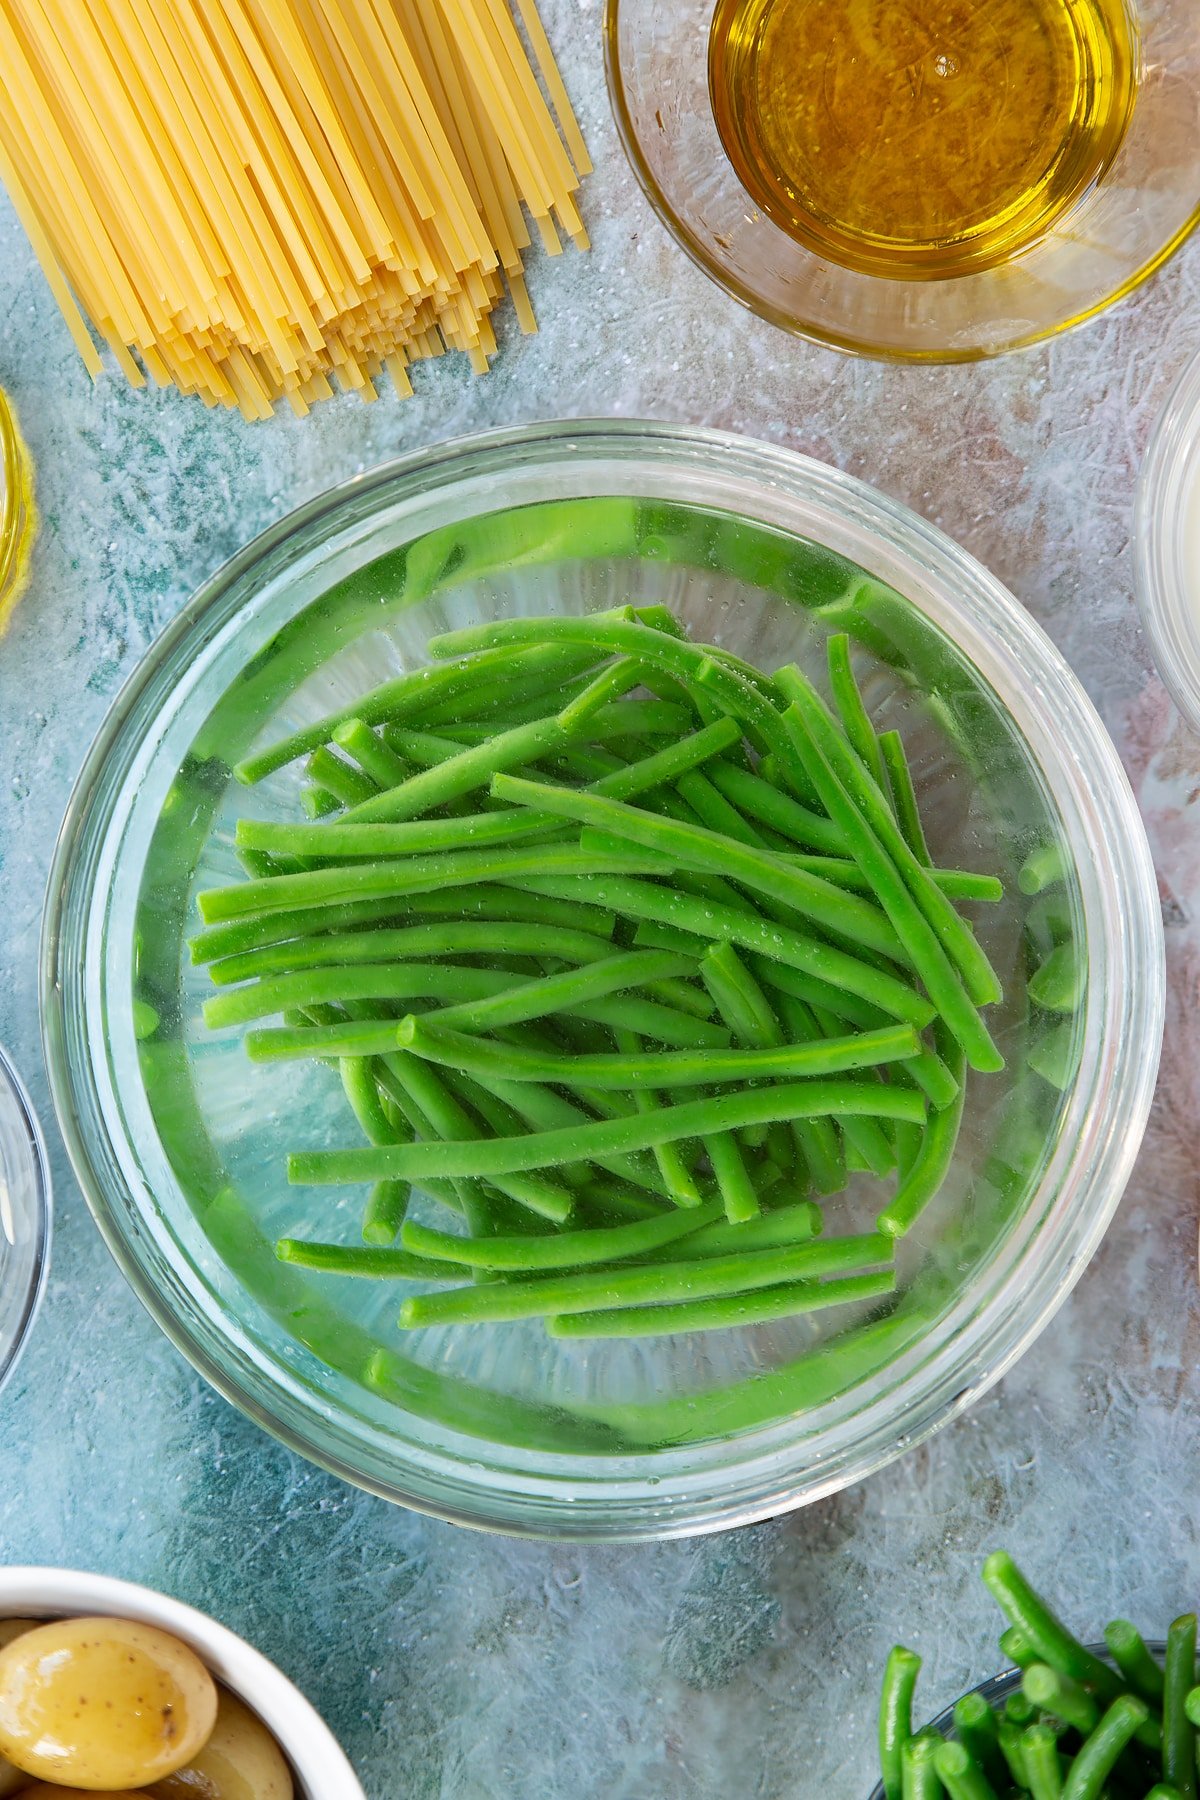 Overhead shot of green beans in a bowl with water.